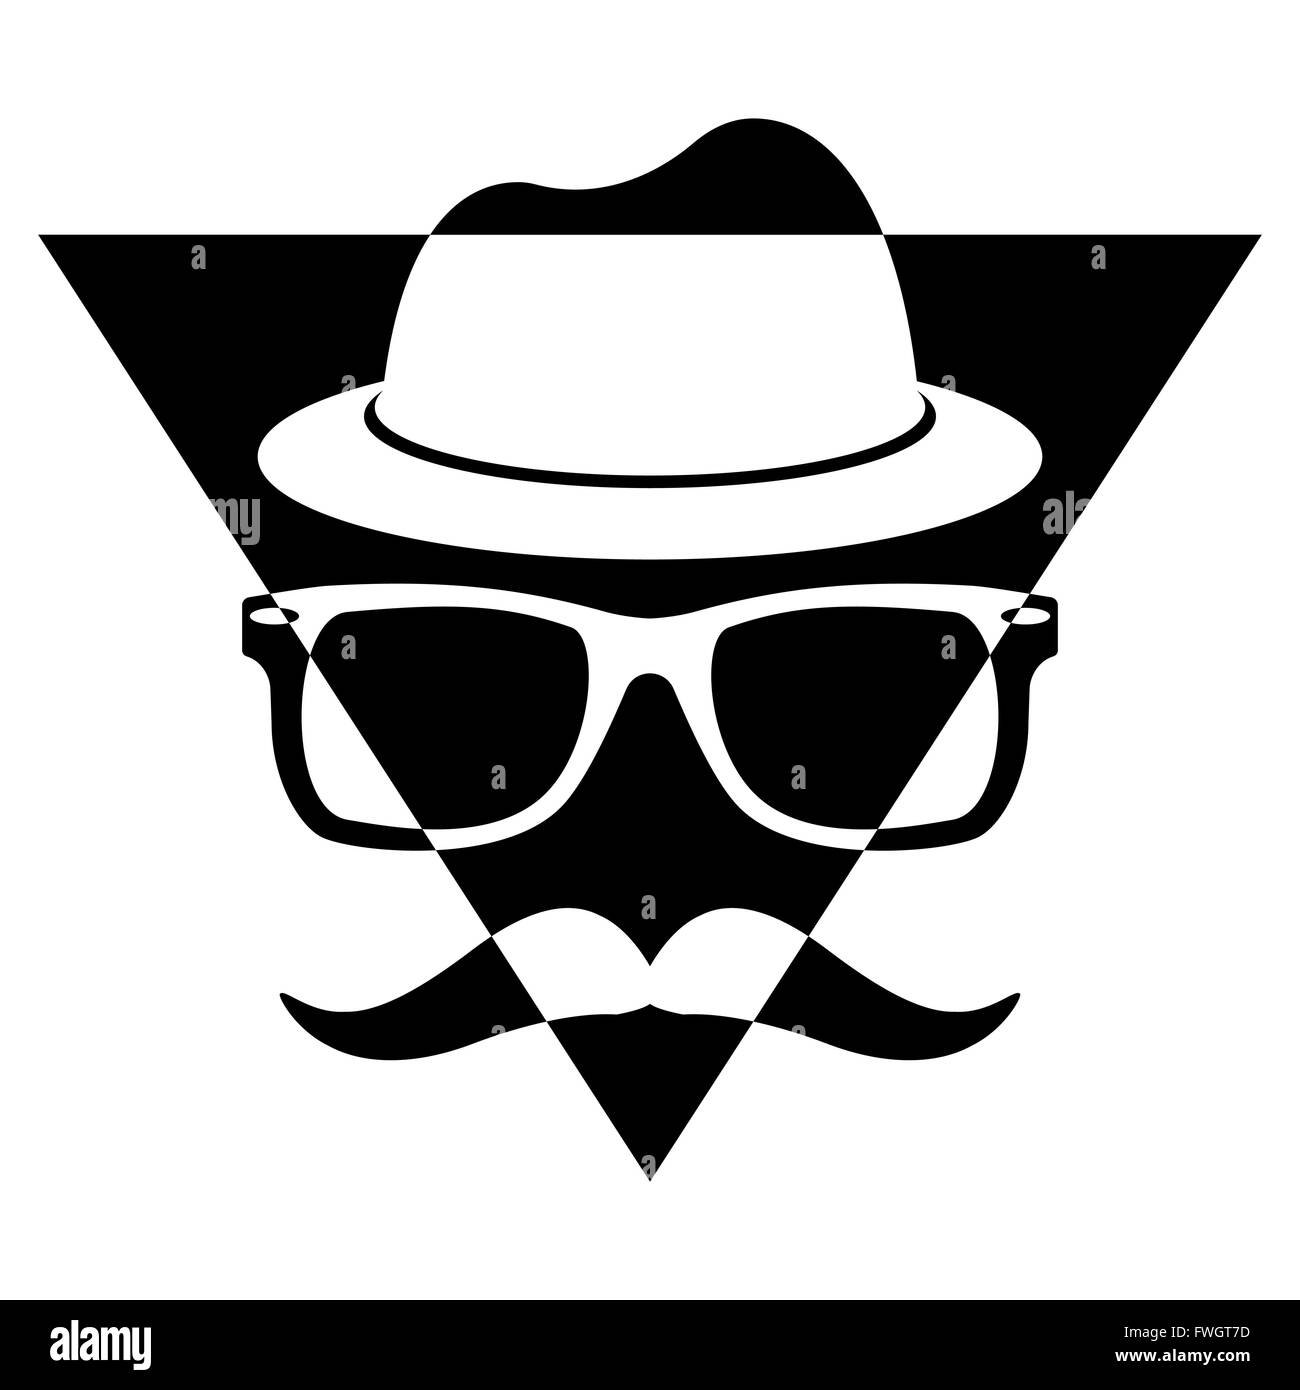 Illustration Vector Graphic Triangle Hipster for different purpose in web and graphic design Stock Vector